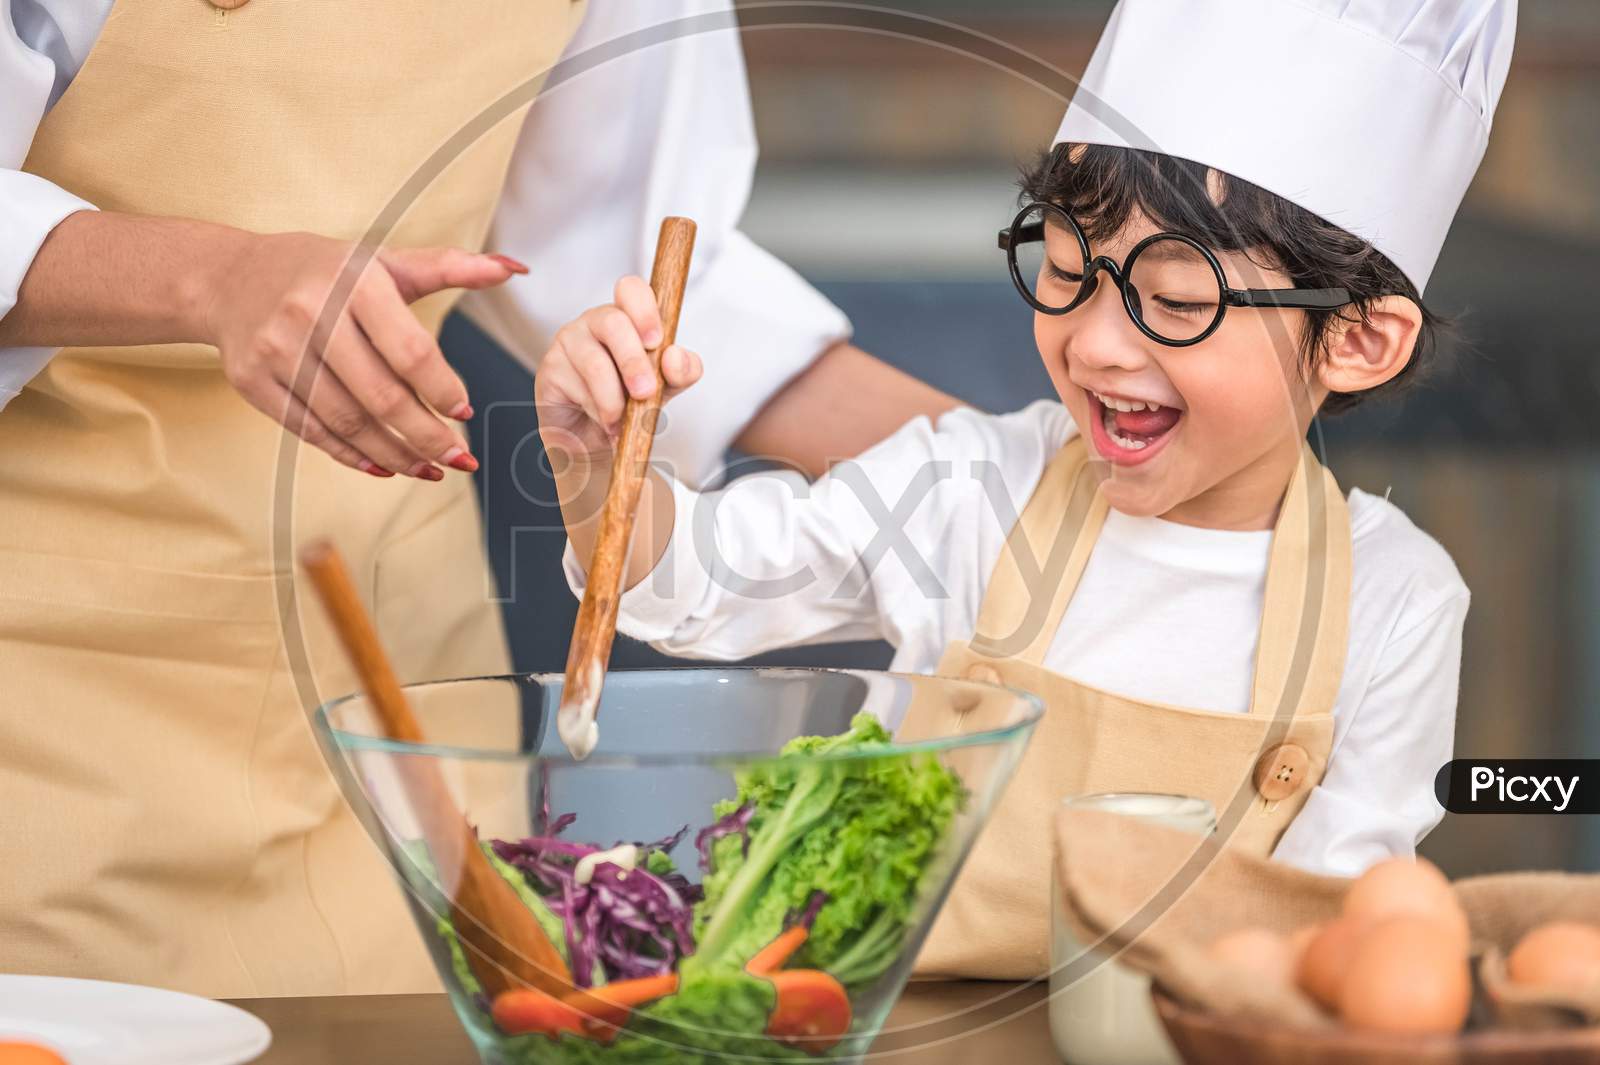 Cute Little Asian Happy Boy Interested In Cooking With Mother Funny In Home Kitchen. People Lifestyles And Family. Homemade Food And Ingredients Concept. Two Thai People Making Ketogenic Diet Salad